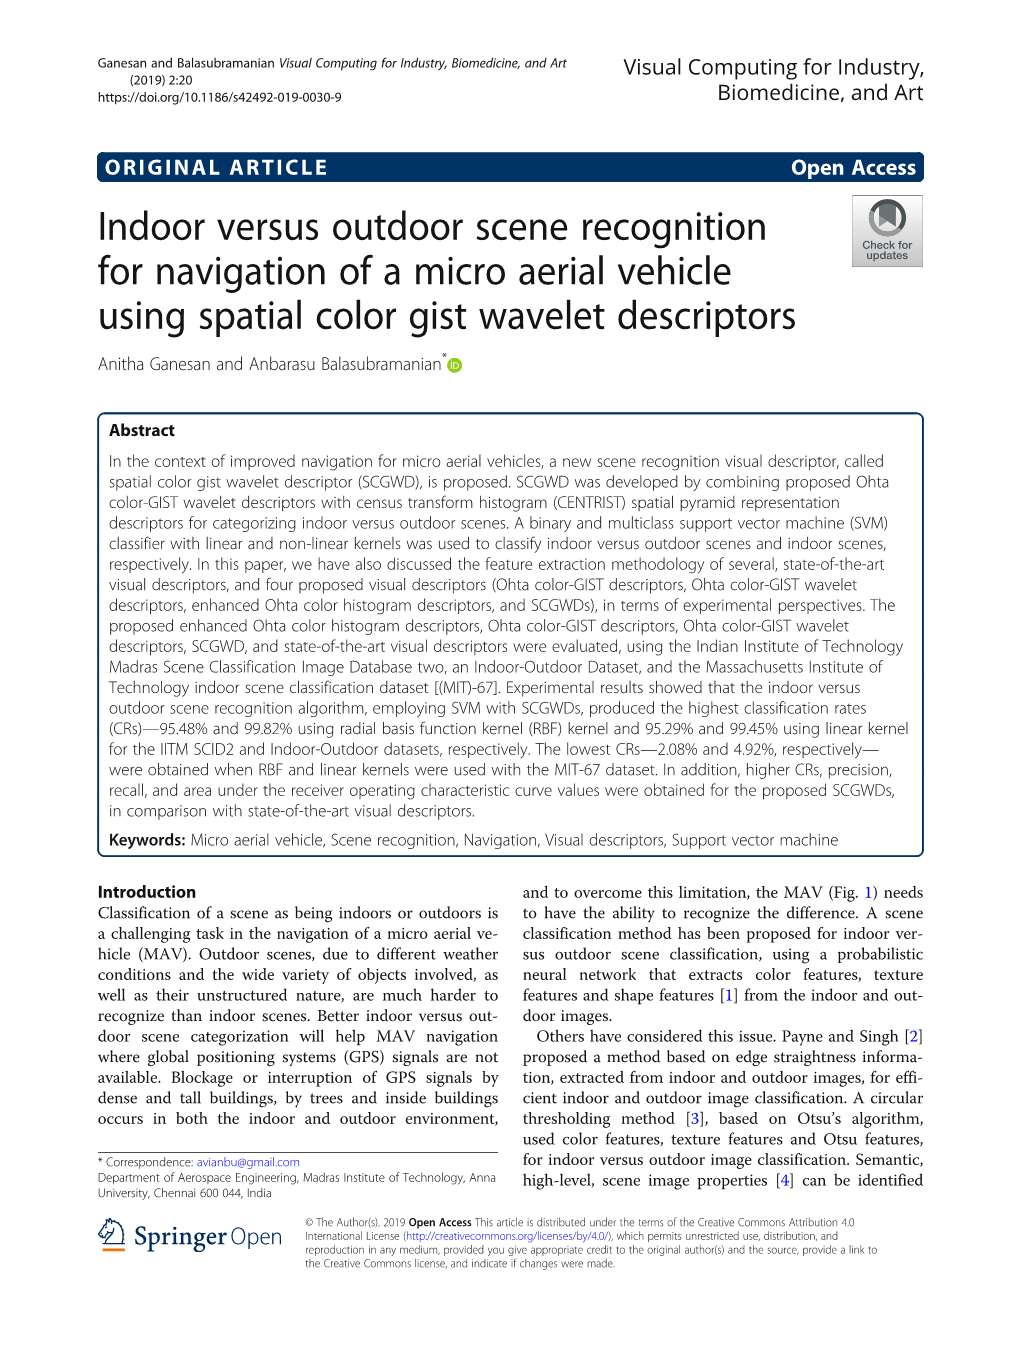 Indoor Versus Outdoor Scene Recognition for Navigation of a Micro